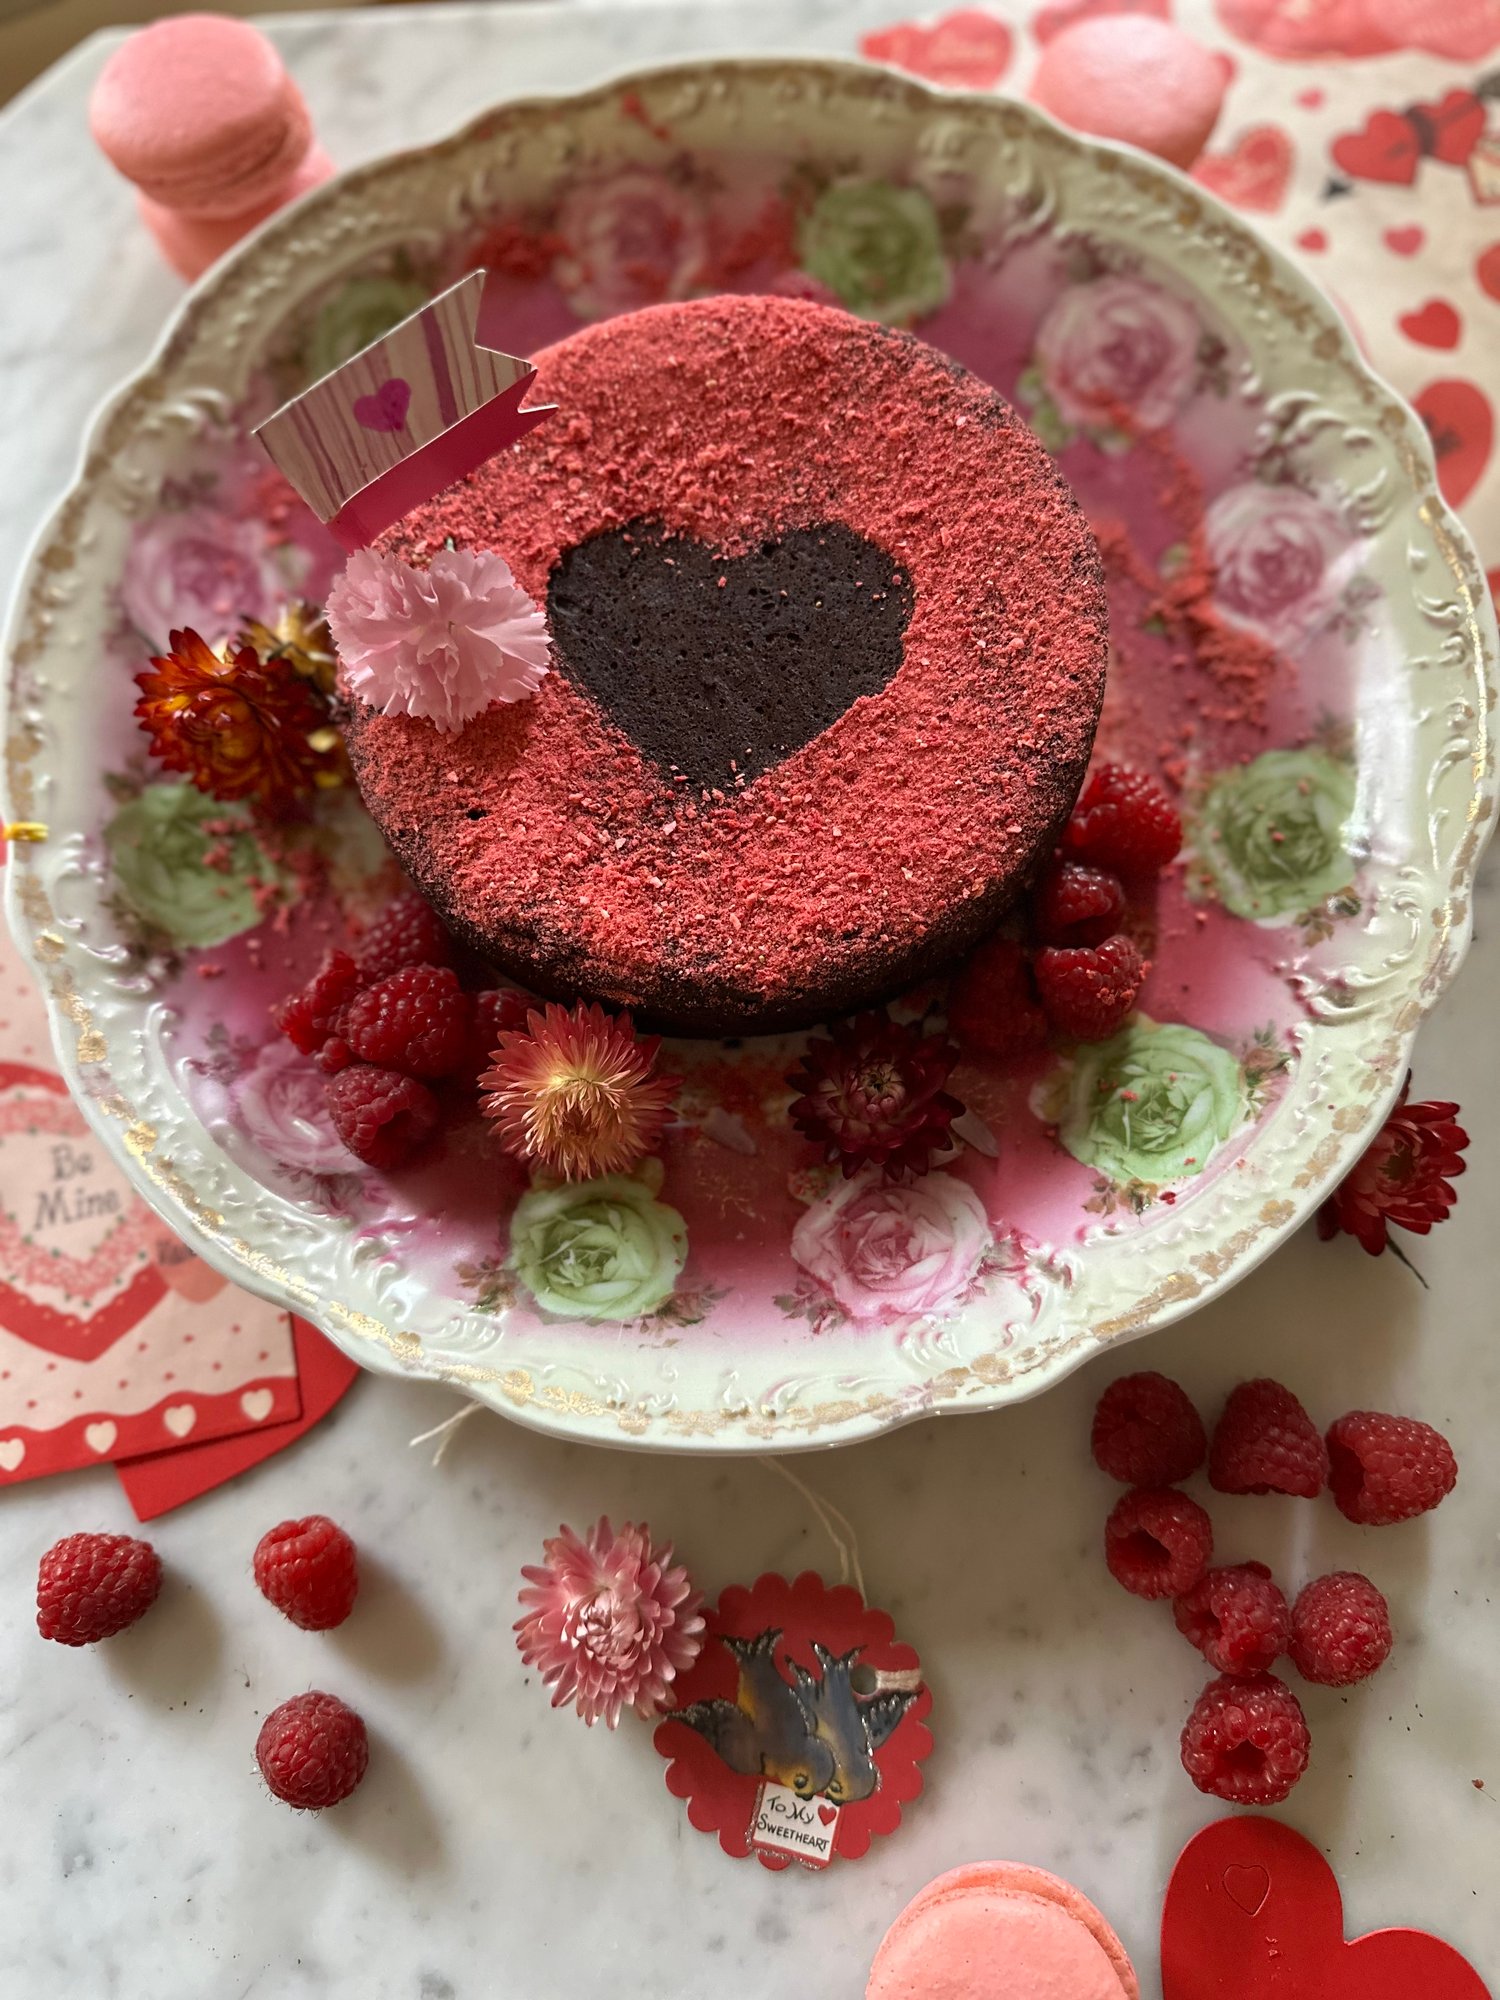 Decorated cake with heart, raspberries and flowers